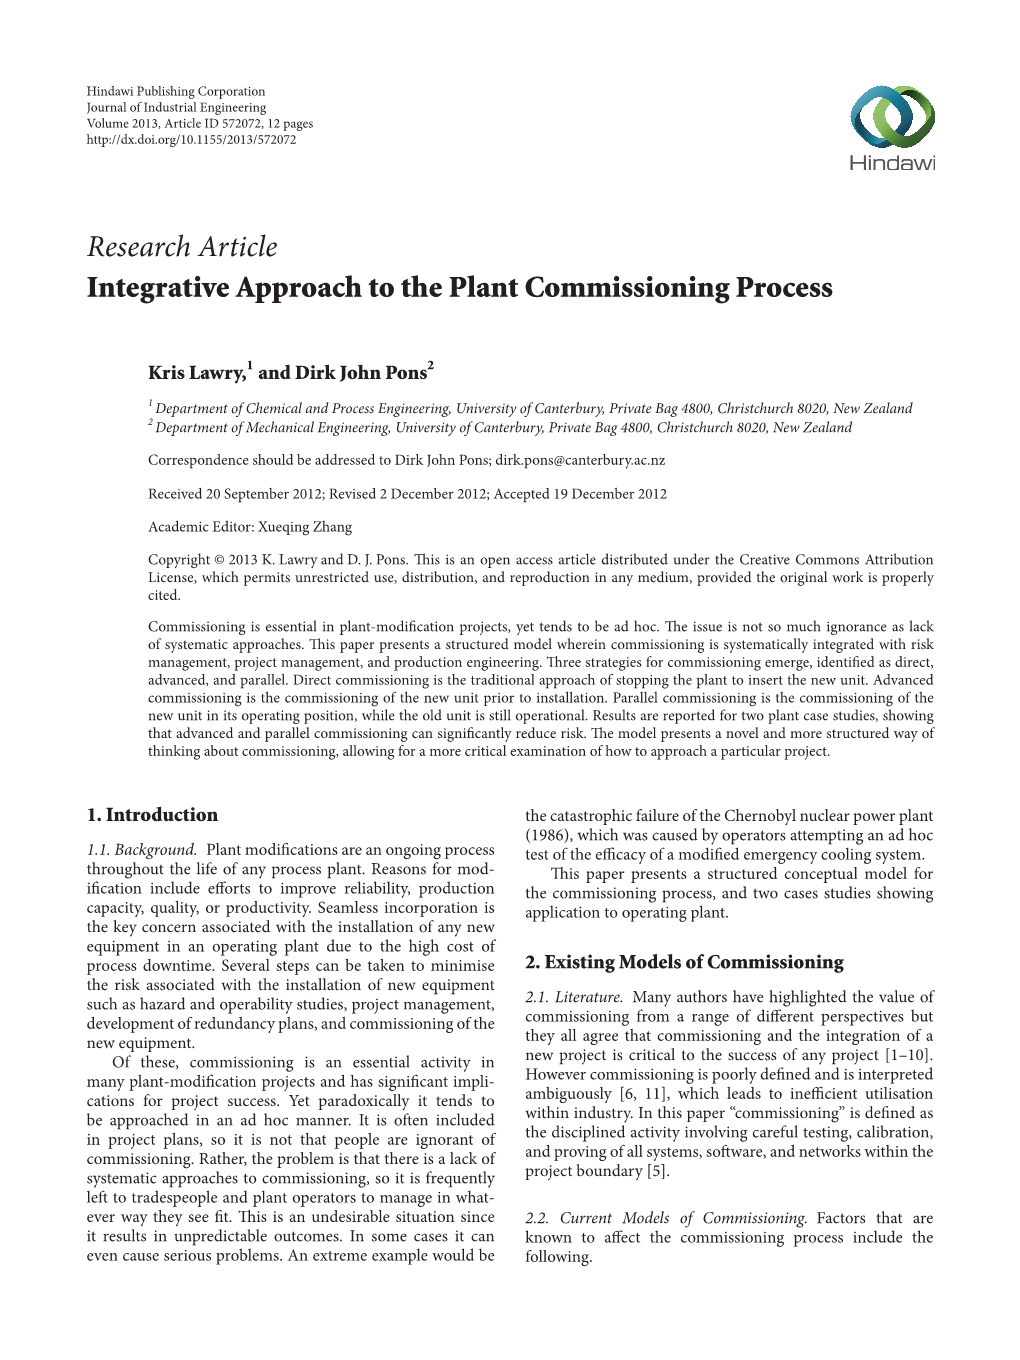 Research Article Integrative Approach to the Plant Commissioning Process